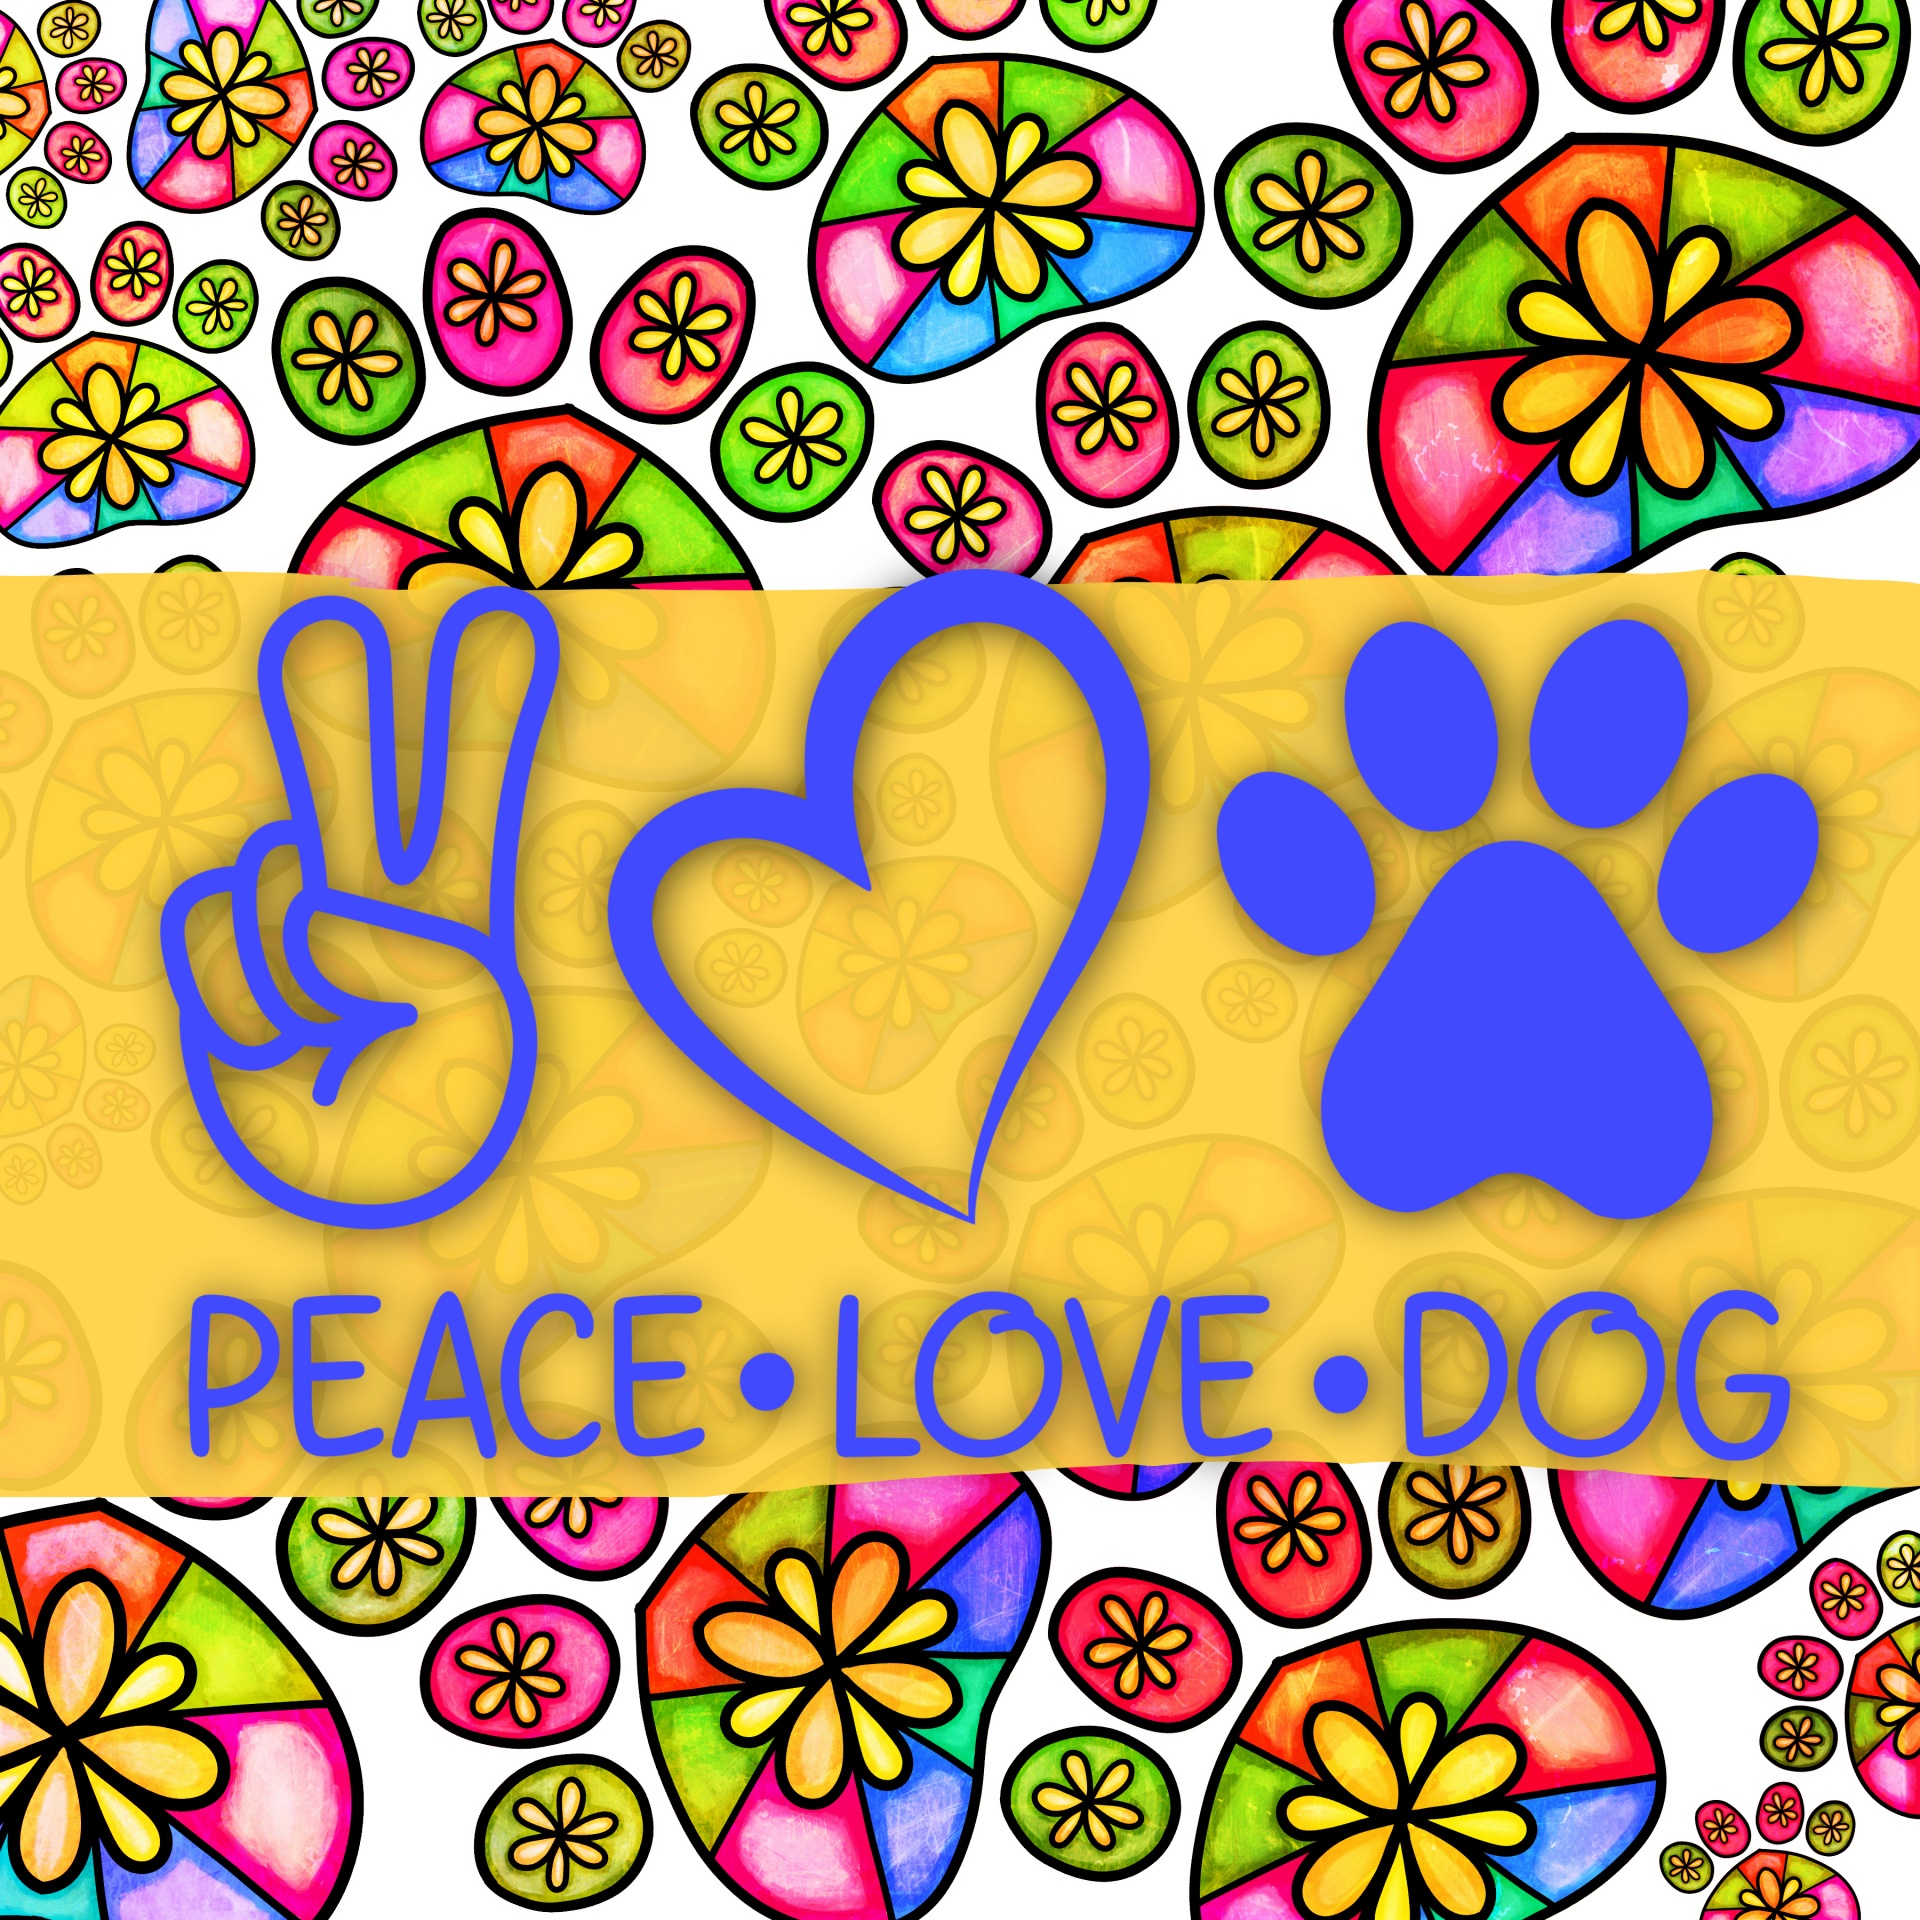 Peace Love Dogs Poster